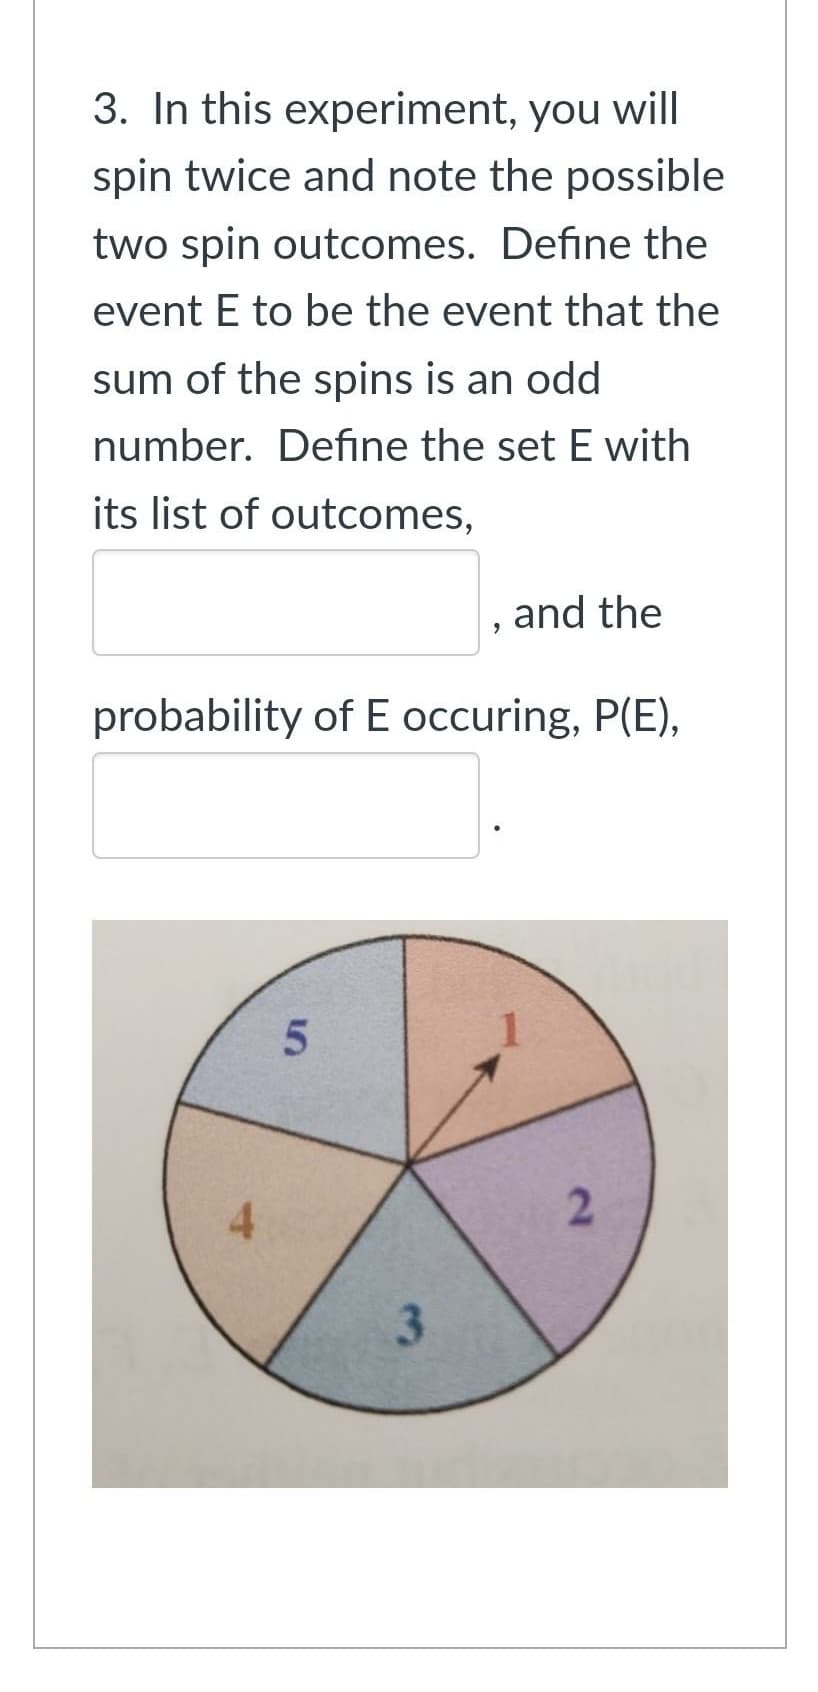 3. In this experiment, you will
spin twice and note the possible
two spin outcomes. Define the
event E to be the event that the
sum of the spins is an odd
number. Define the set E with
its list of outcomes,
4
probability of E occuring, P(E),
5
9
3
and the
1
2